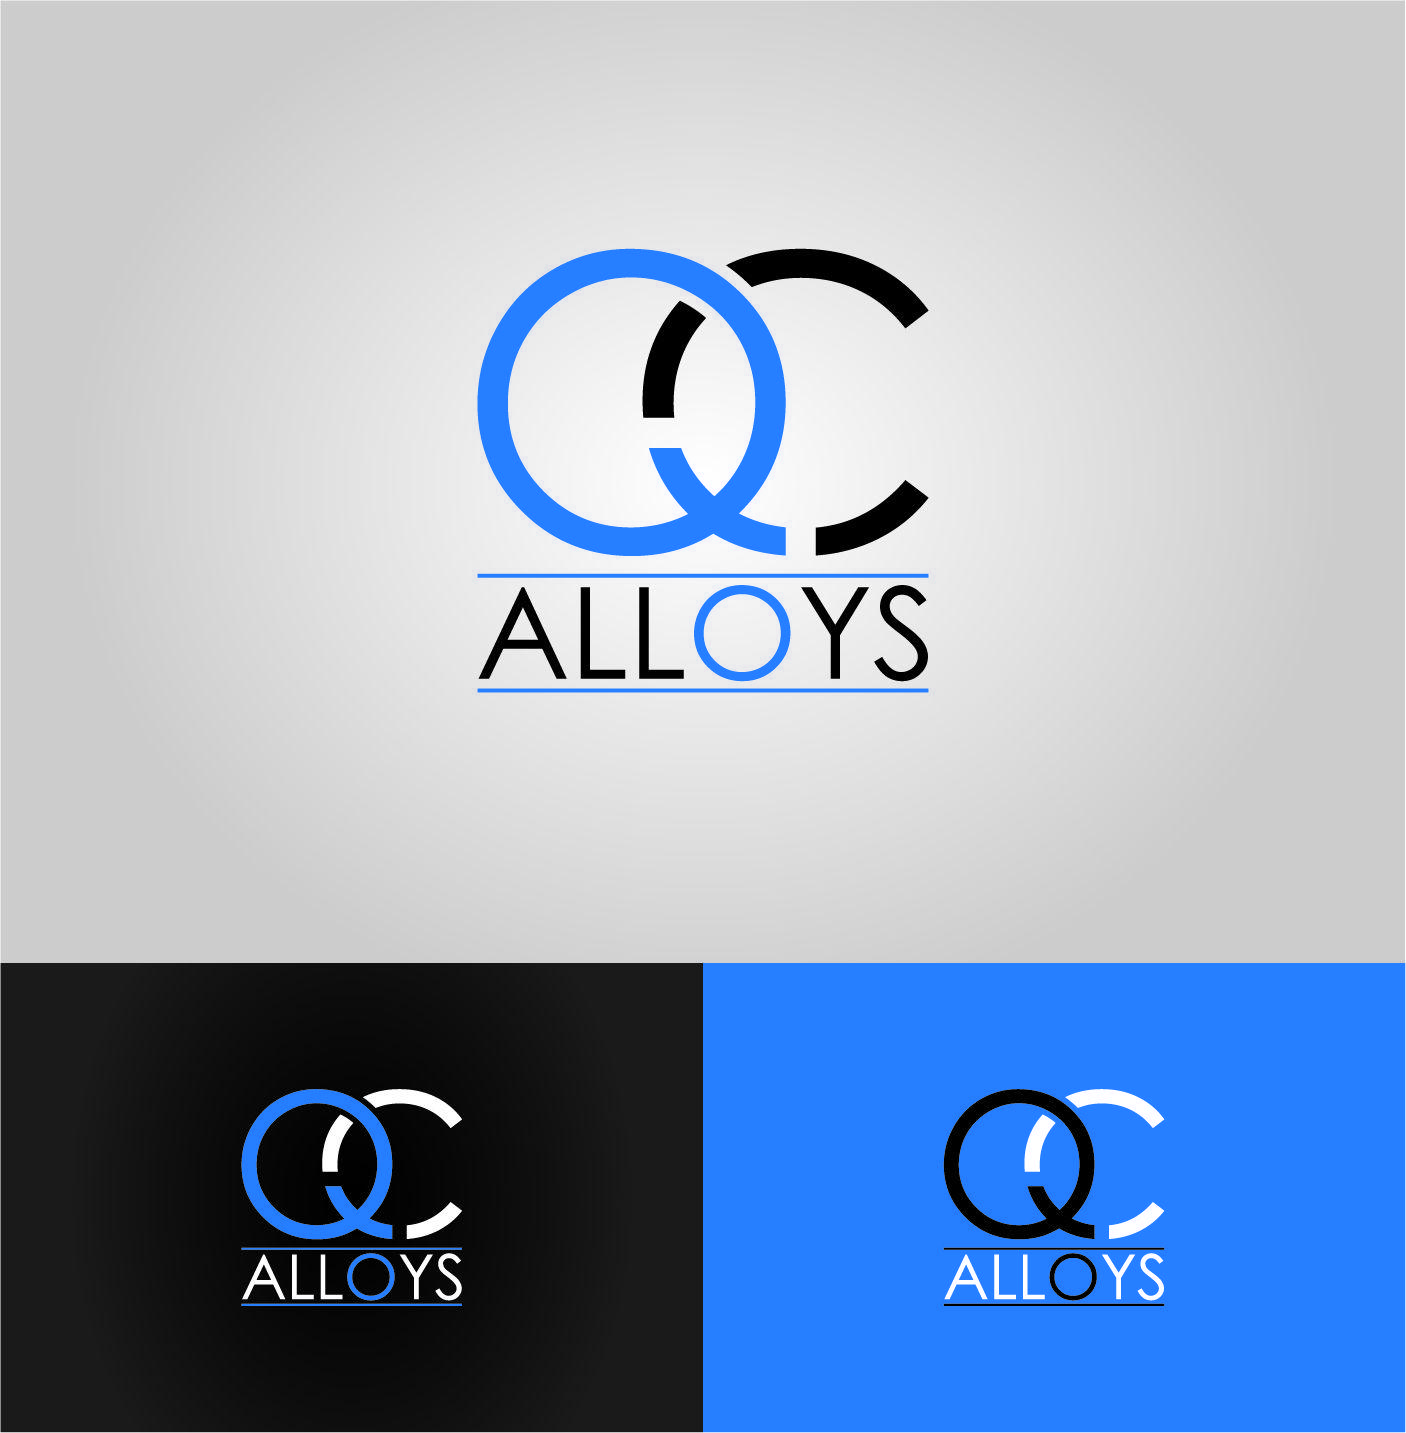 QC Logo - Bold, Serious, Oil And Gas Logo Design for QC Alloys